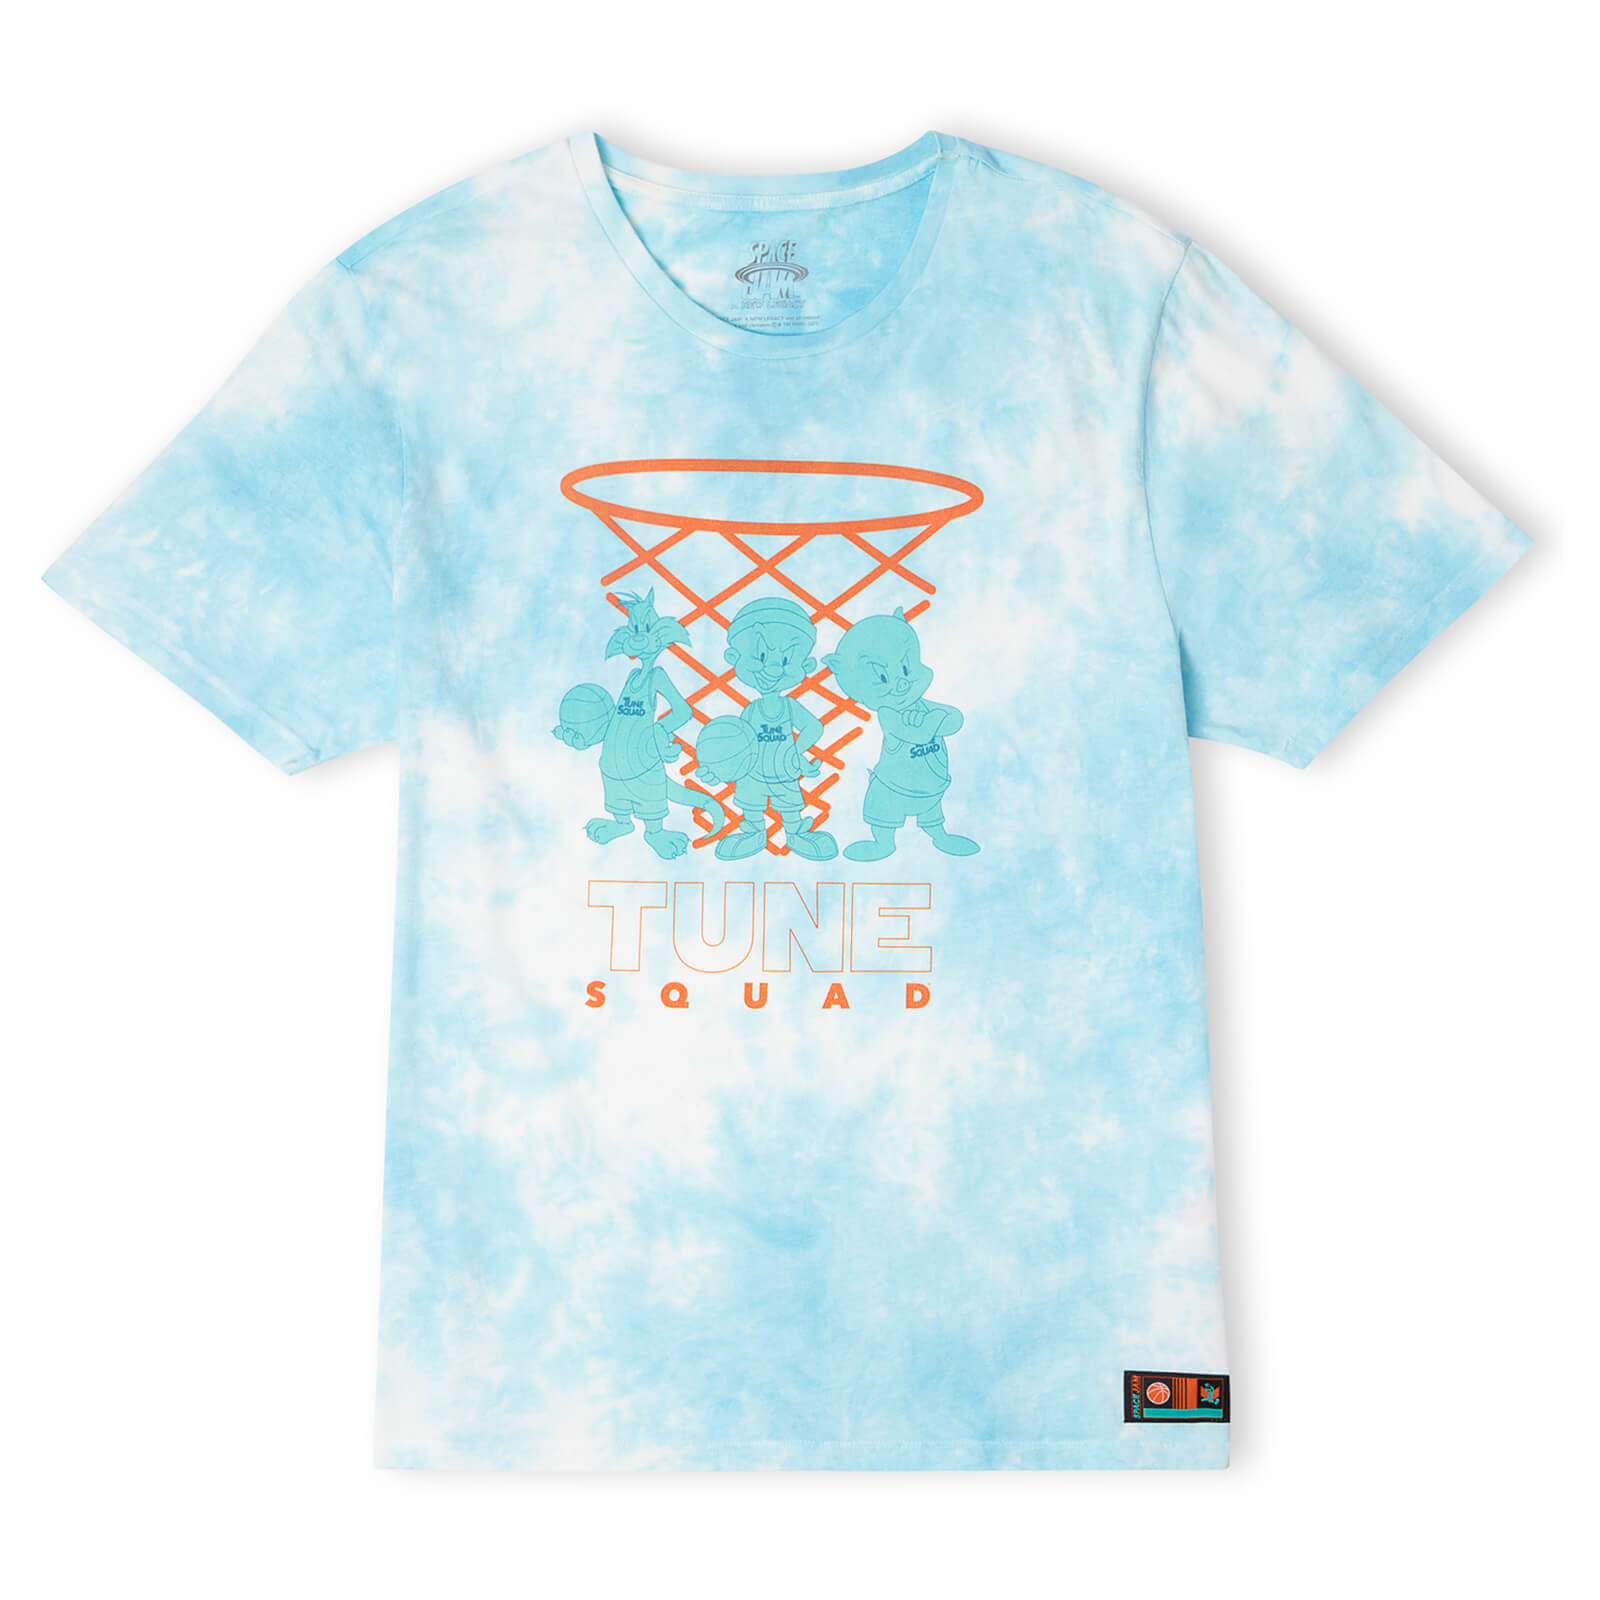 Space Jam Tune Squad Characters Unisex T-Shirt - Turquoise Tie Dye - S - Turquoise Tie